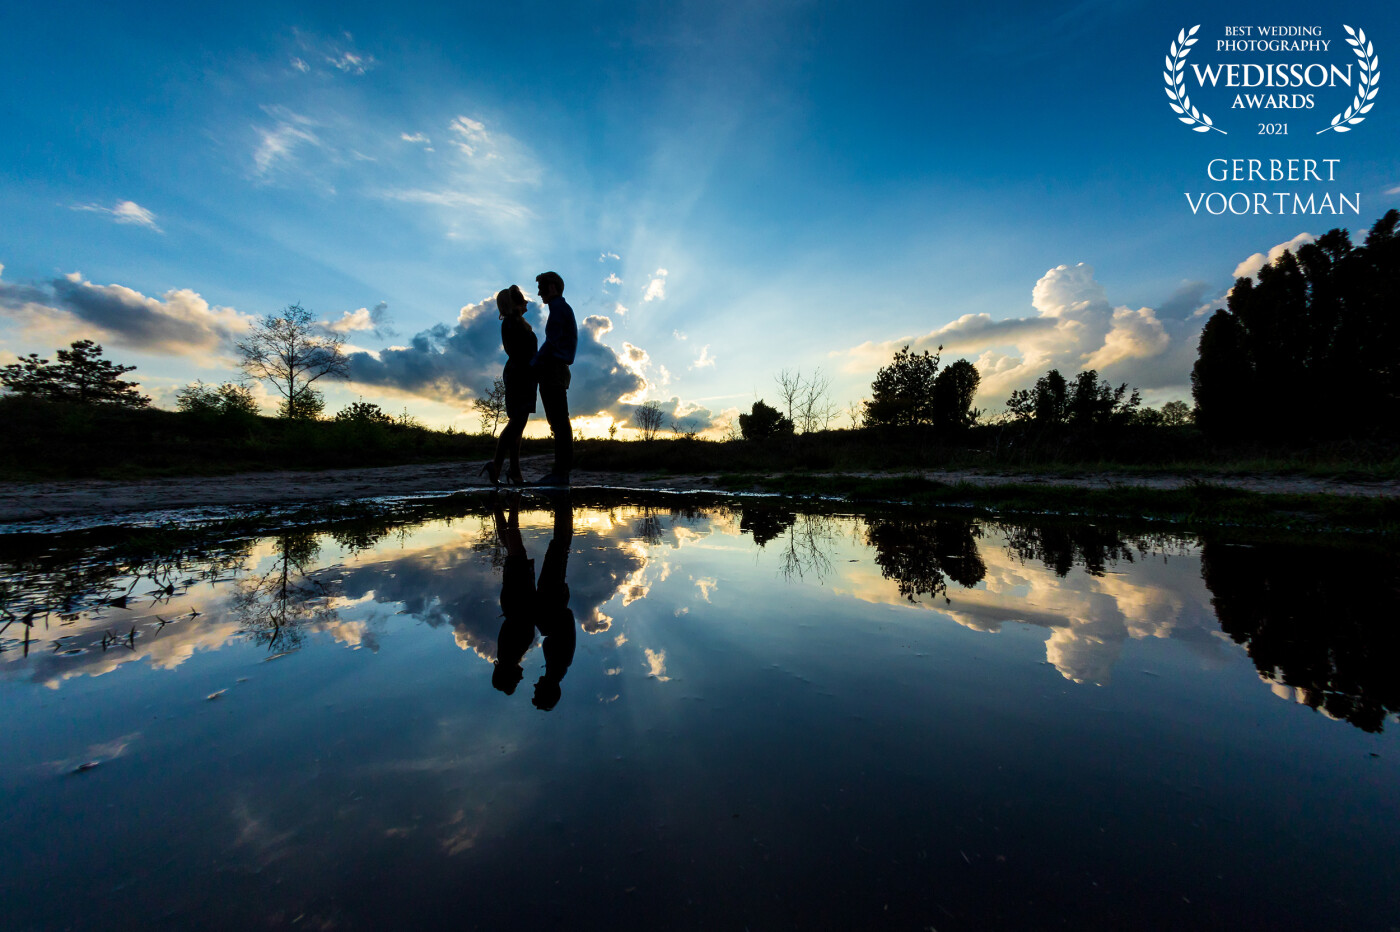 Rain, rain and more rain, that was spring 2021 in the Netherlands. Planning this pre-weddingshoot at this moment and time was a bit lucky, mother nature and my 15mm fisheye did a great job. 